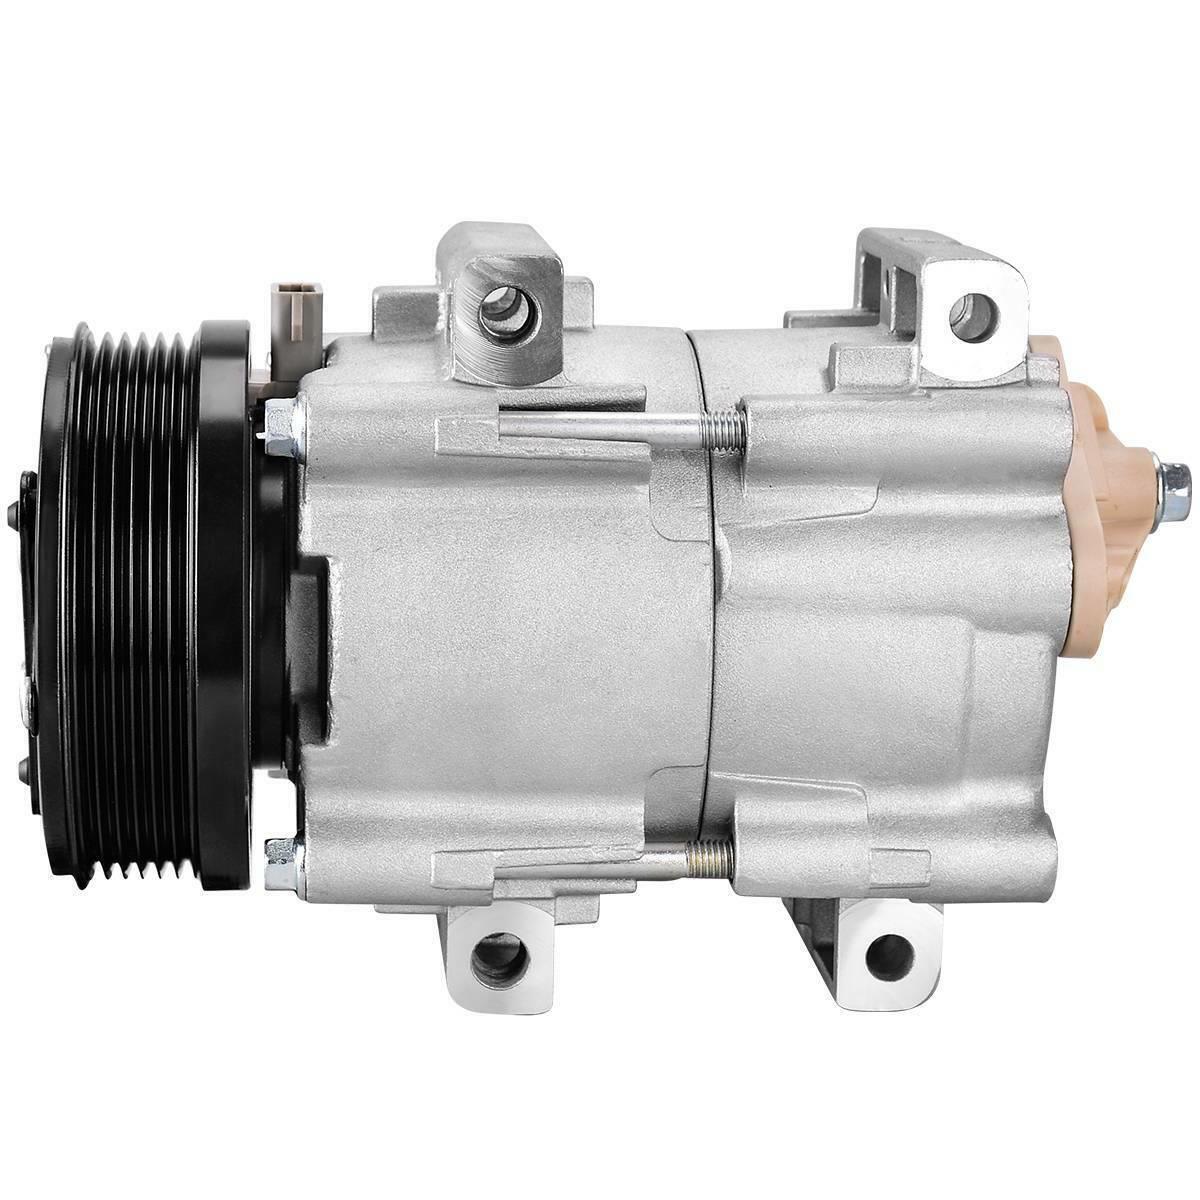 AC A/C Compressor Fit For Mercury Sable Ford Taurus 3.0L 2001-2007 CO 103090C